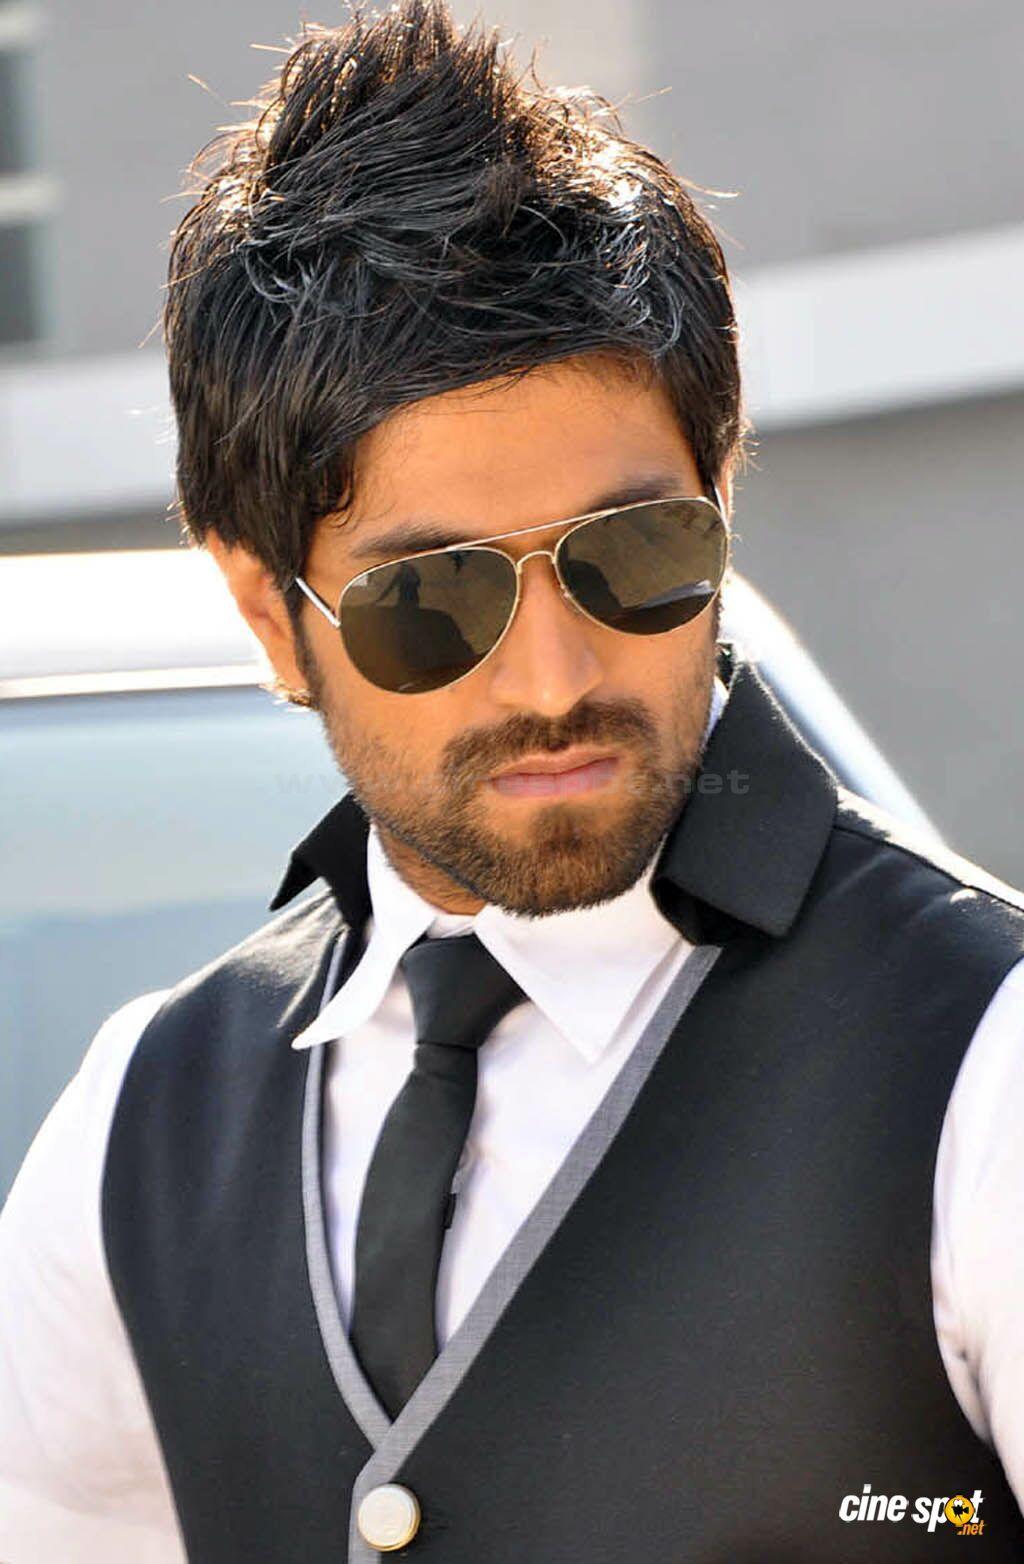 Yash Kannada Film Actor Hot And Beautiful Wallpaper Free. Actor photo, Actor picture, Actors